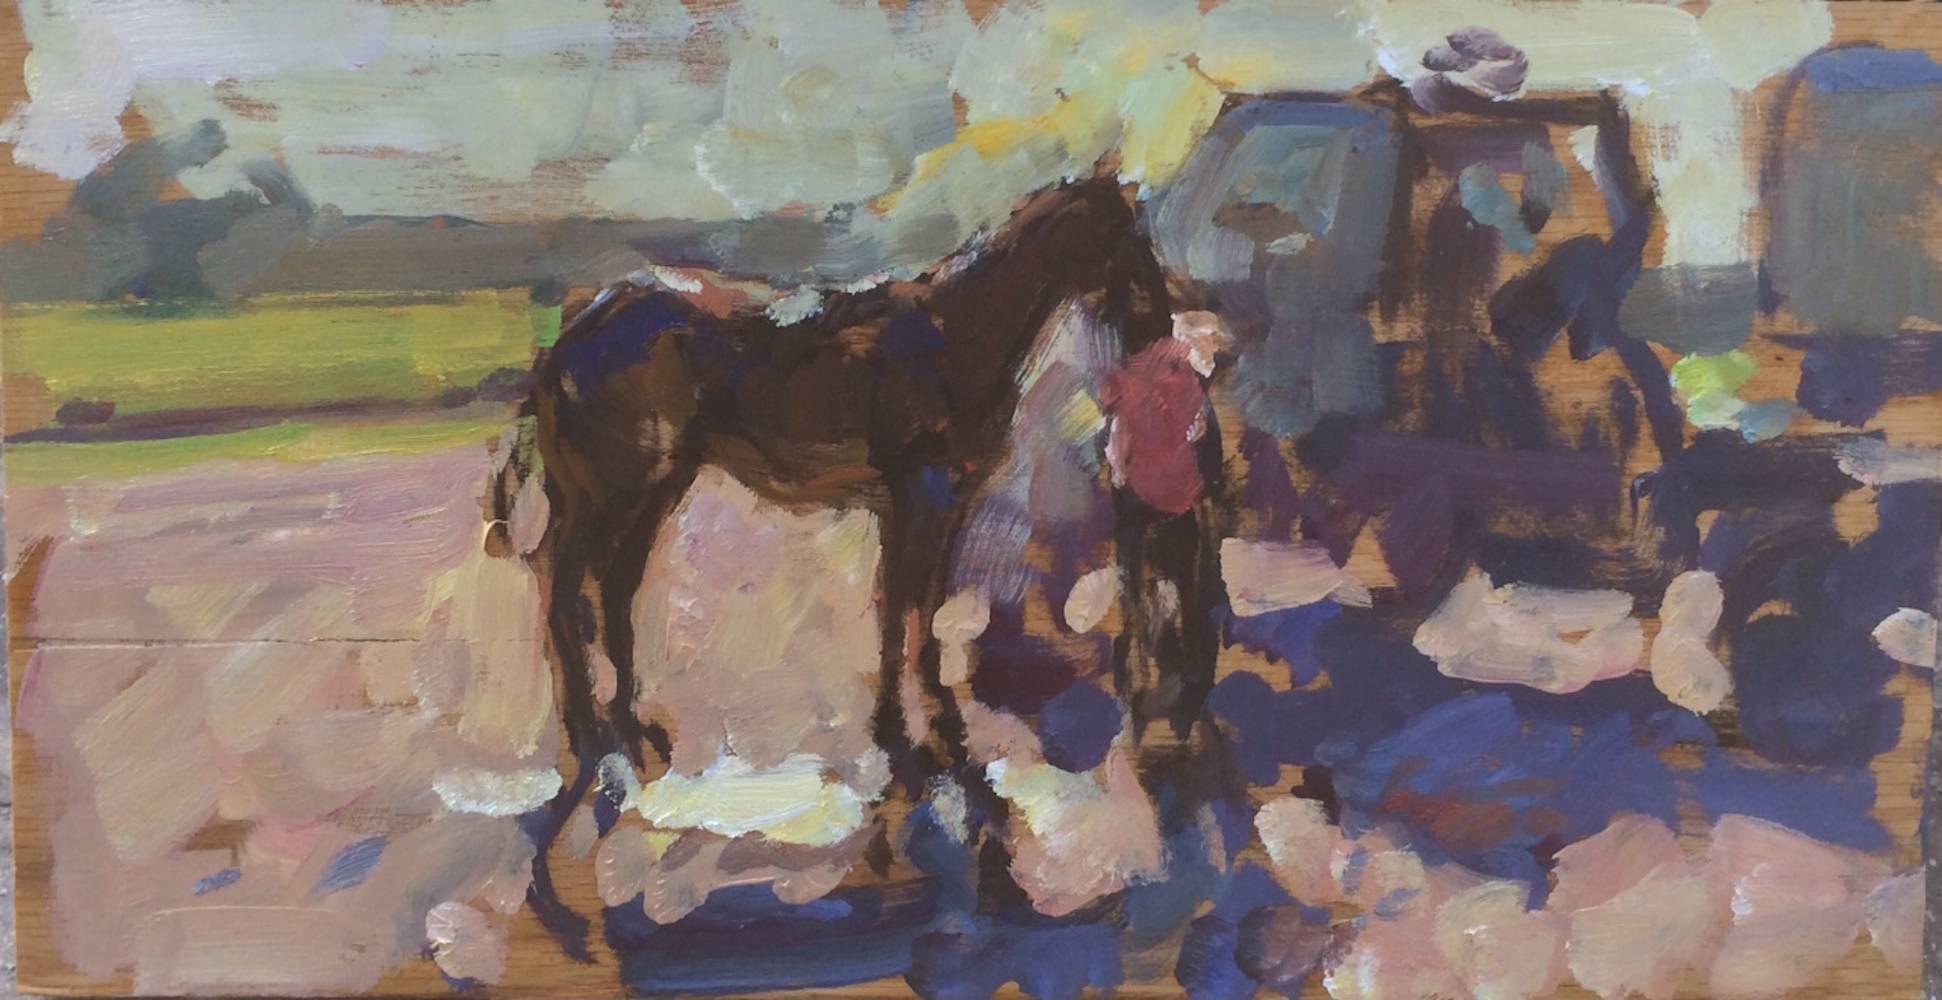 "Pony and Groom" 2014 oil painting on wood, impressionist sketch, equestrian 